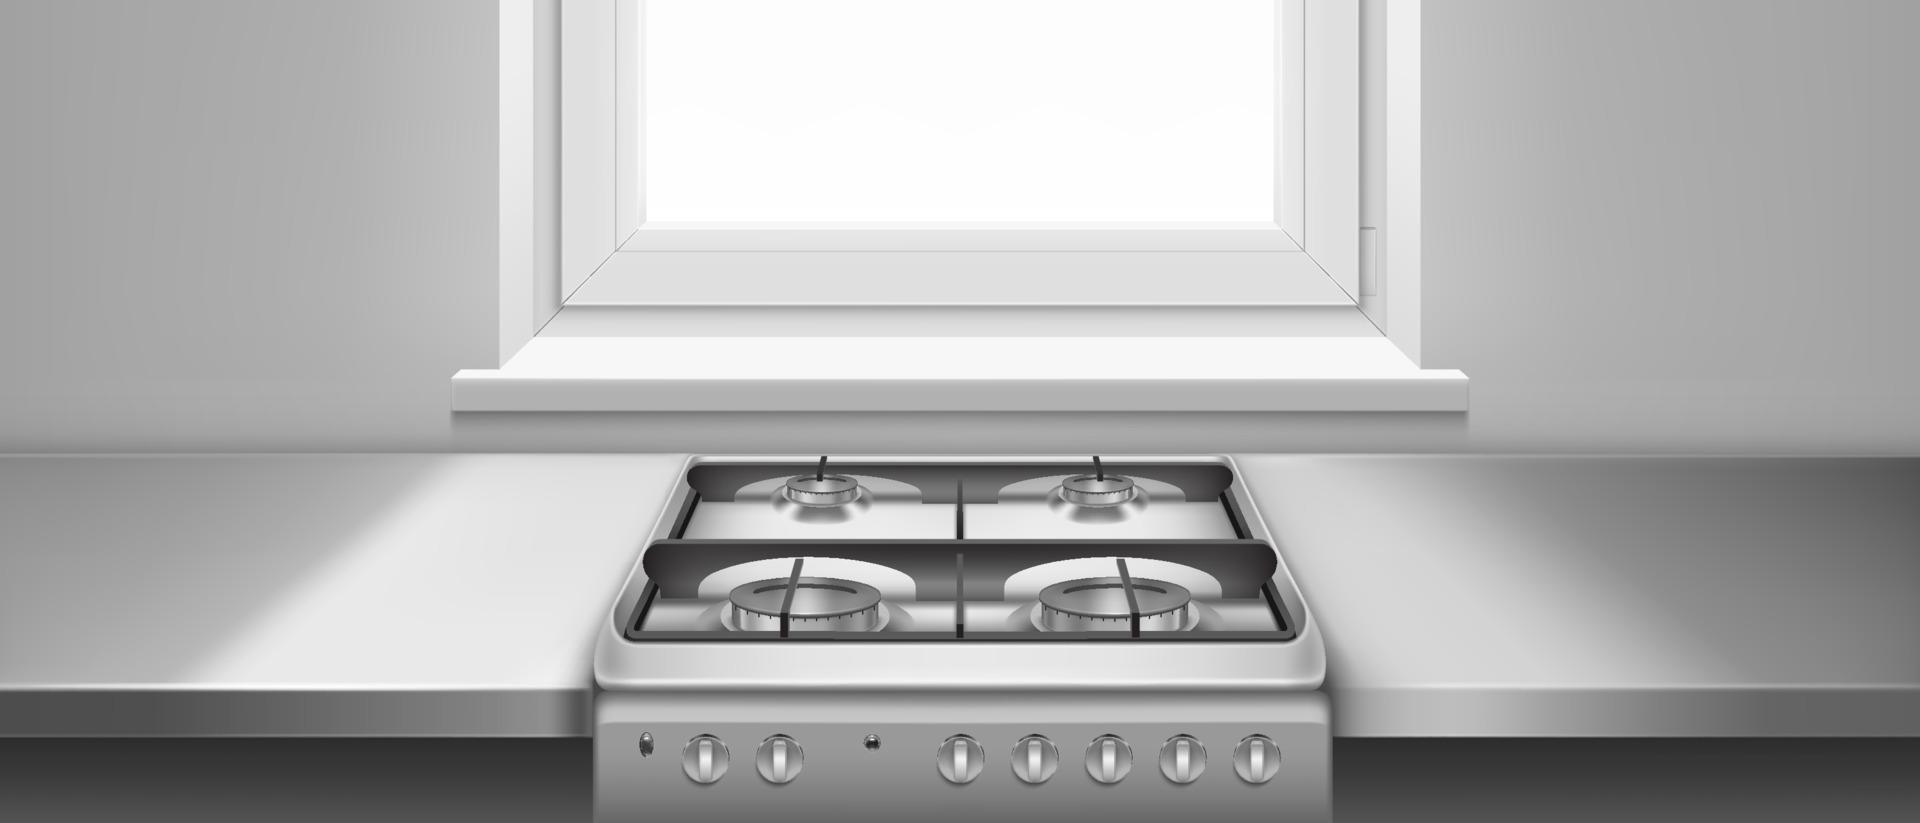 Kitchen table and gas stove with hobs vector